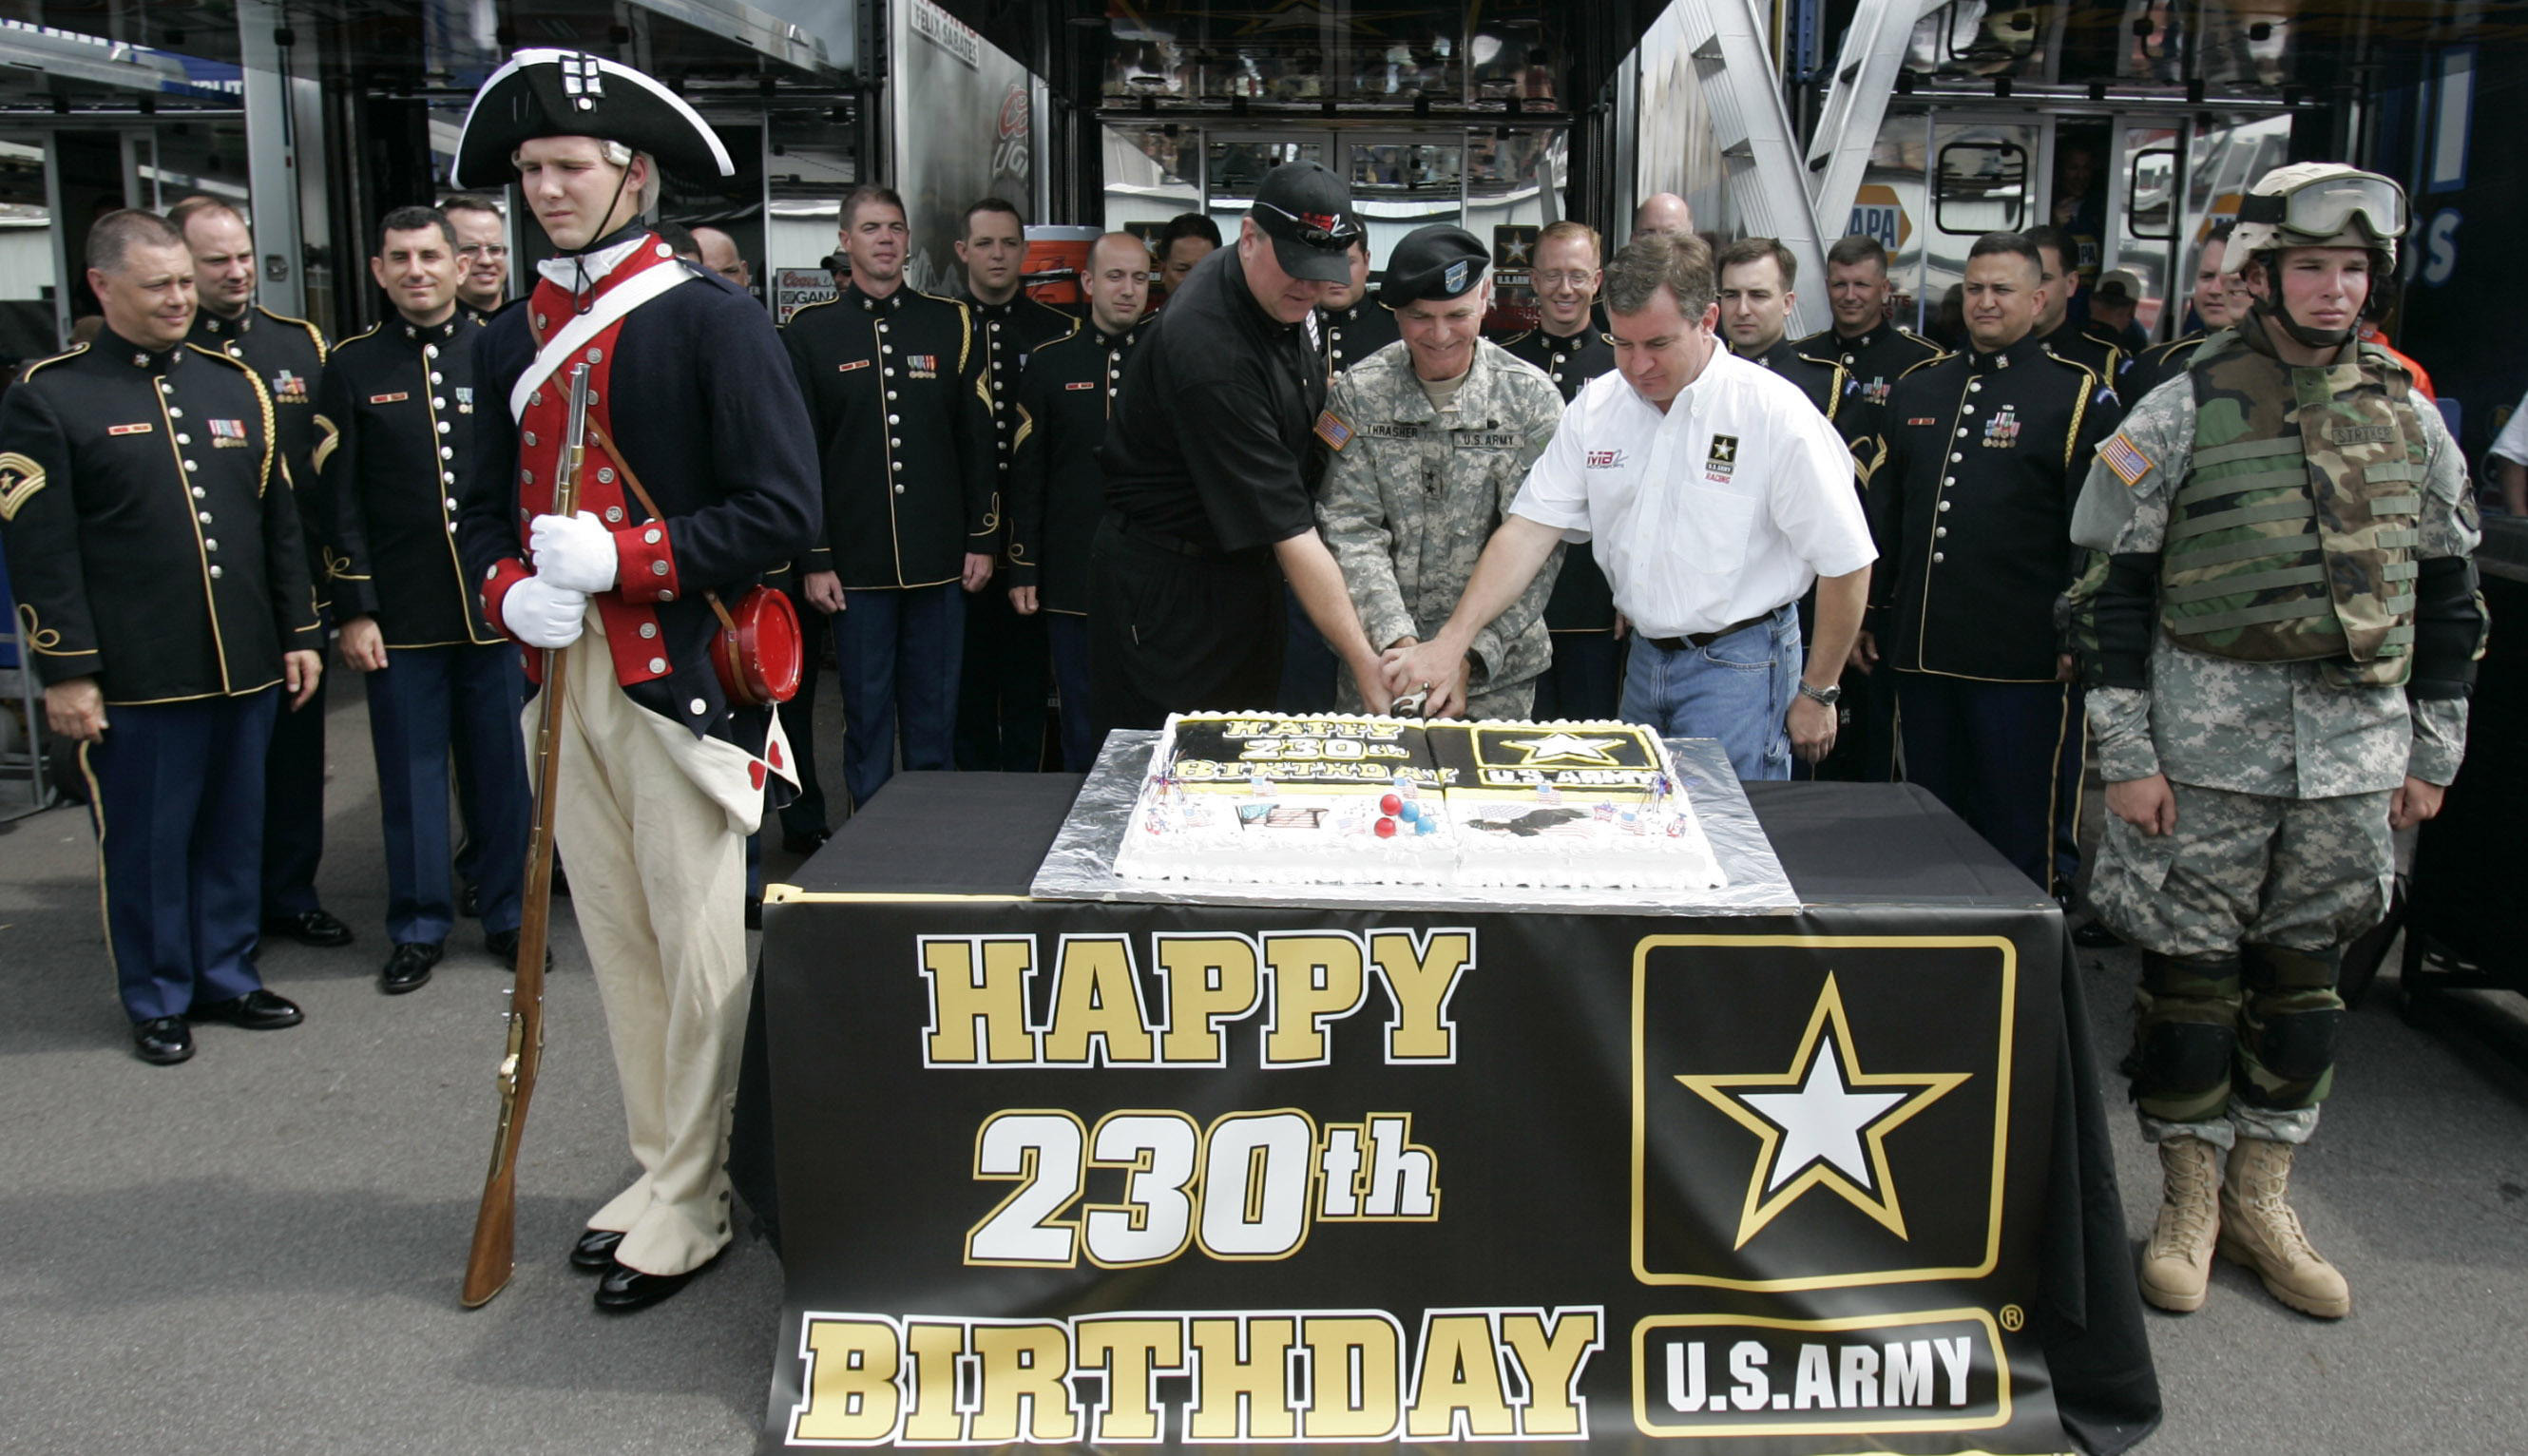 In 2005, the Army celebrated its 230th birthday with its NASCAR driver.